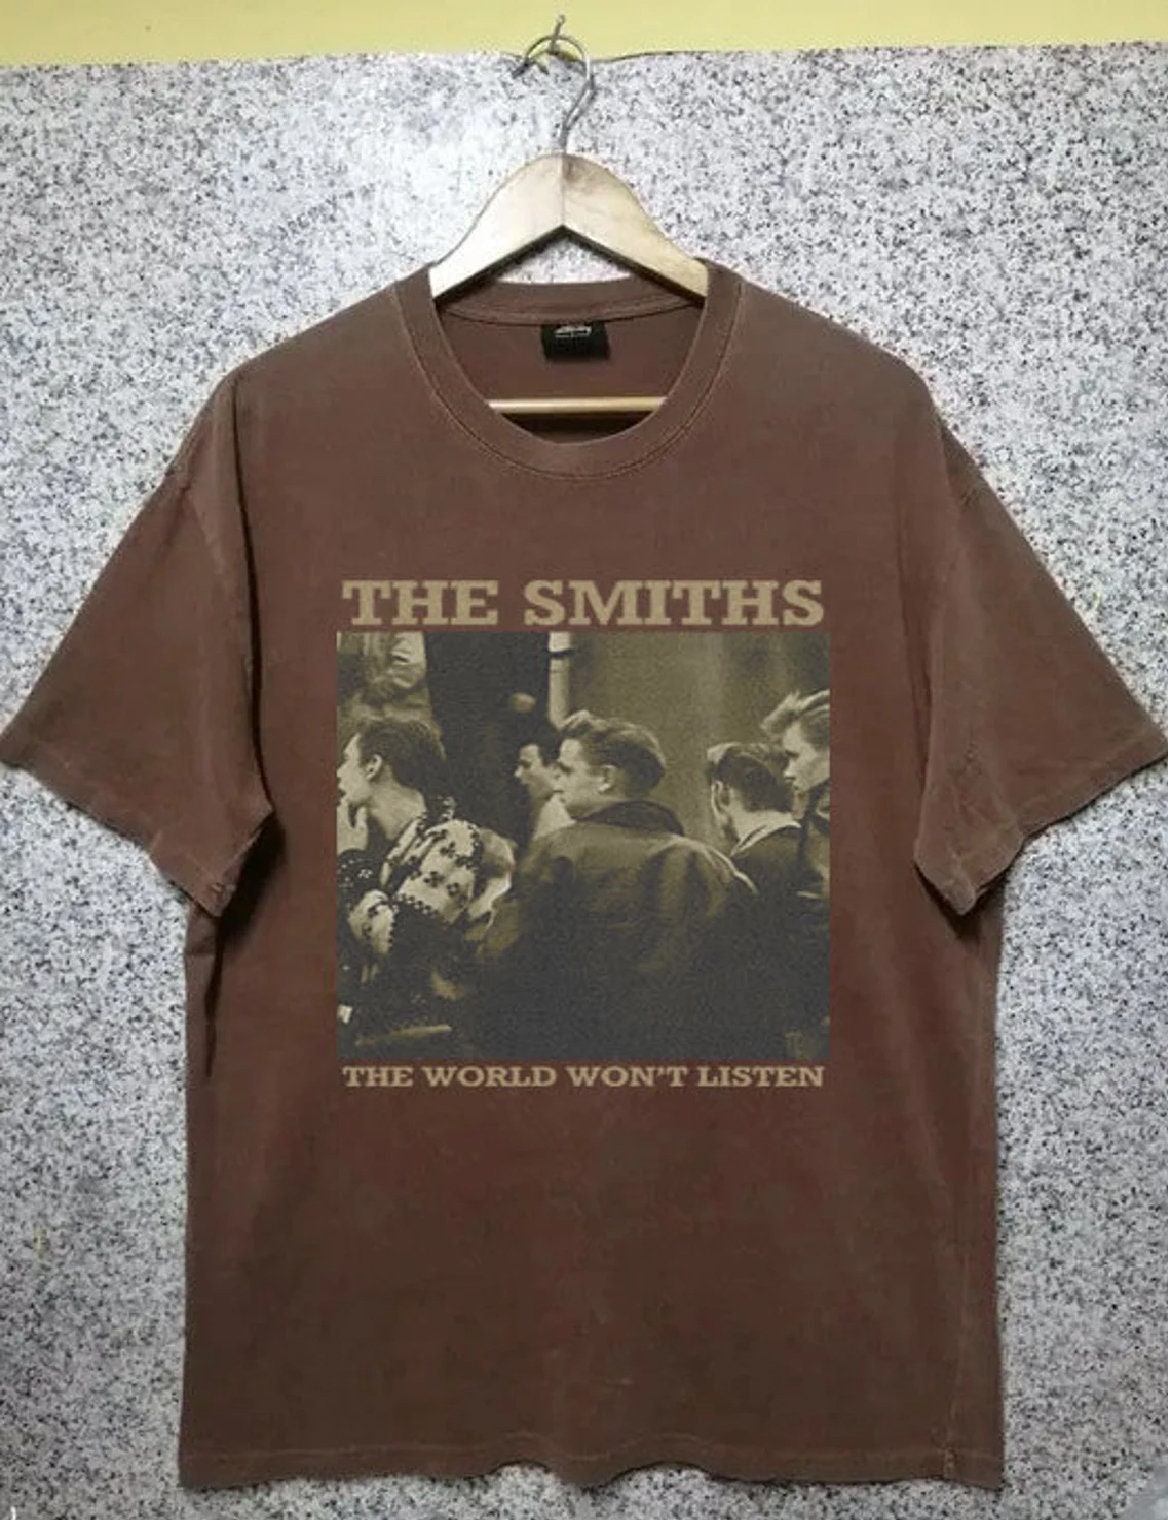 Discover Vintage The Smiths Shirt, Vintage The Smiths 80s Shirt